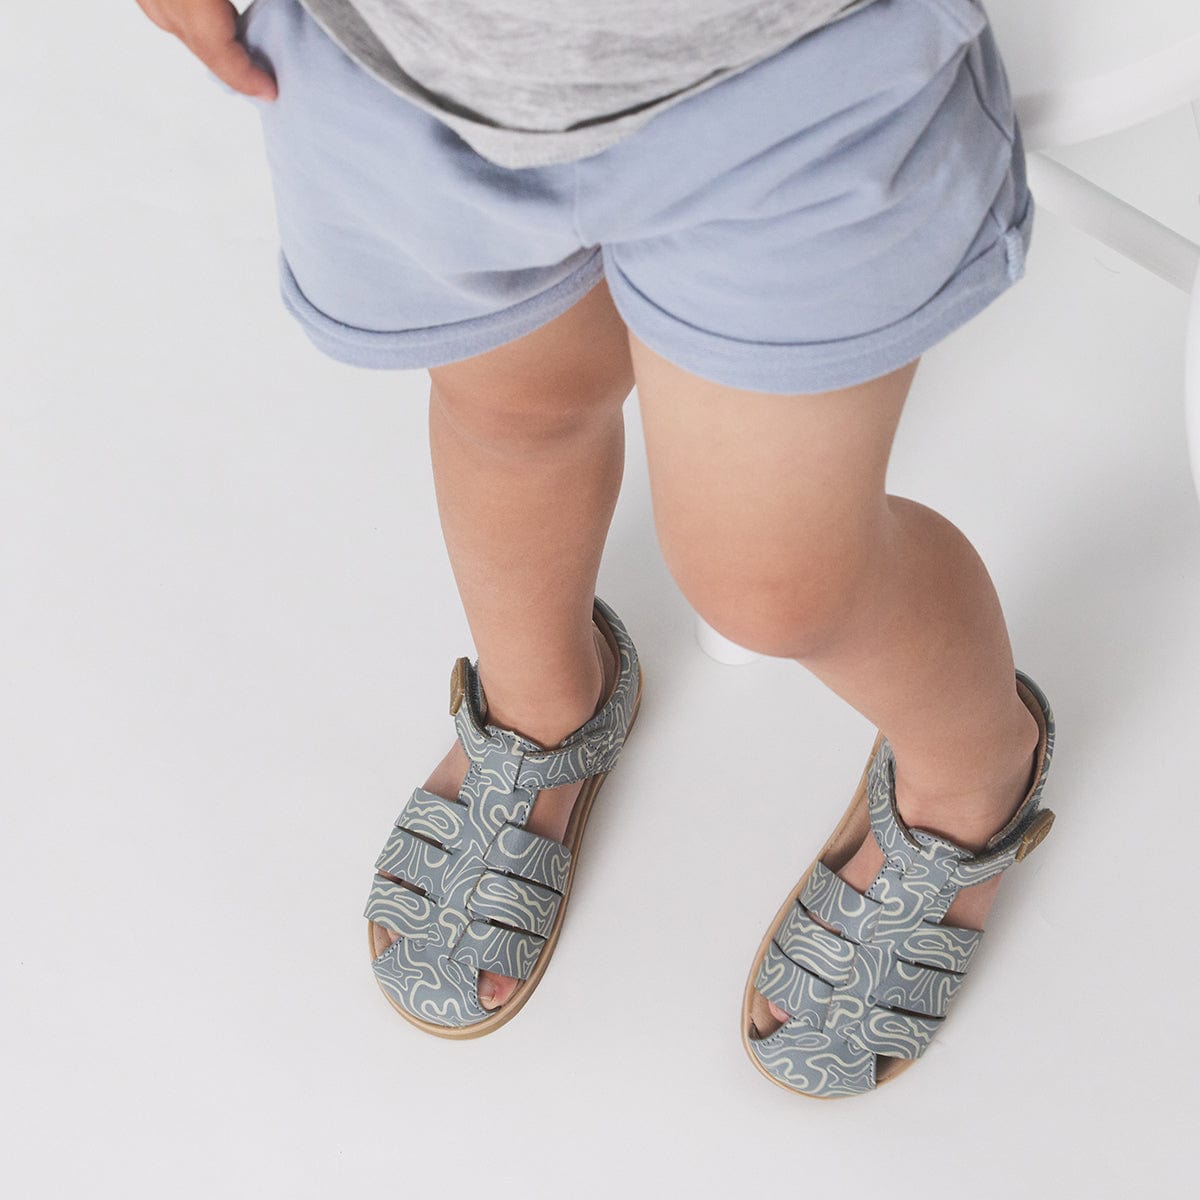 Pretty Brave Boys Shoes Rocco Sandal in Blue Ripple